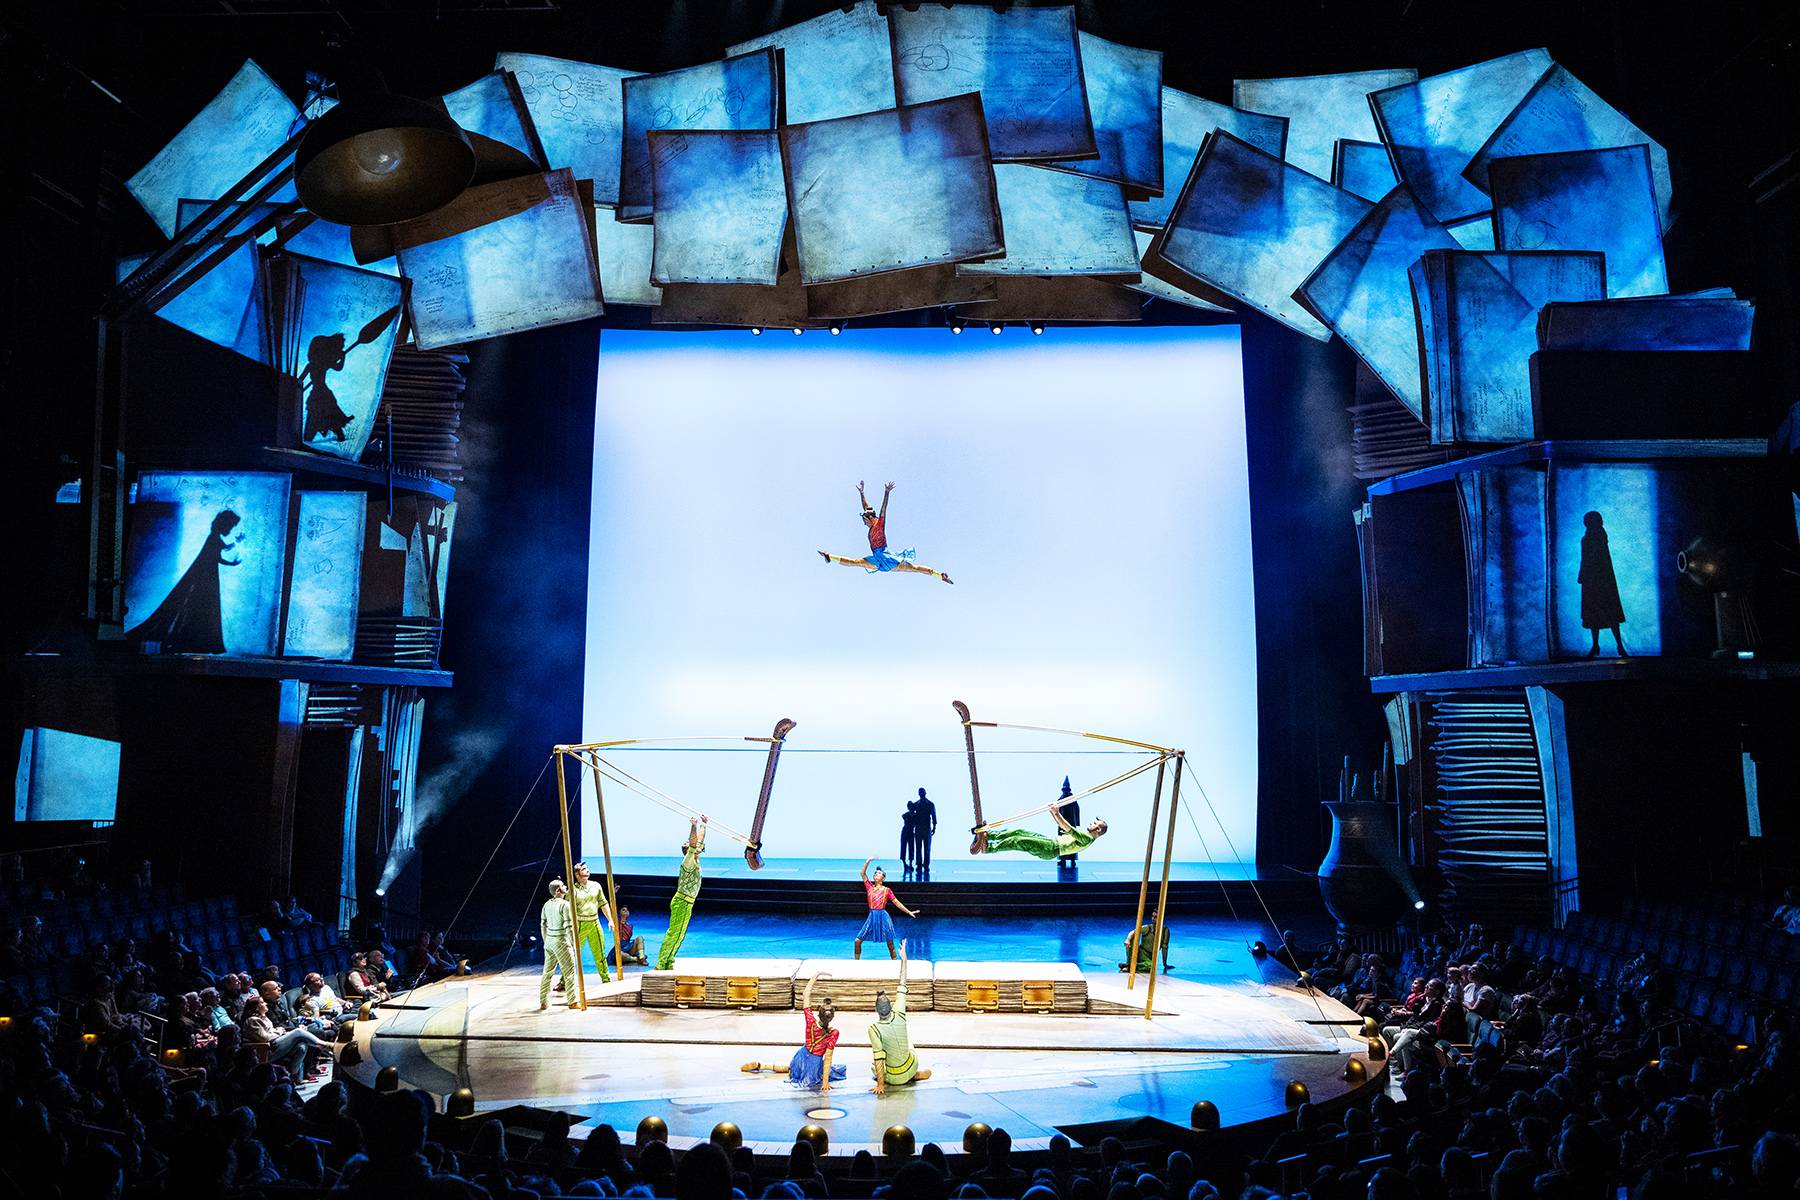 Drawn to Life presented by Cirque du Soleil and Disney celebrates second anniversary with new finale act